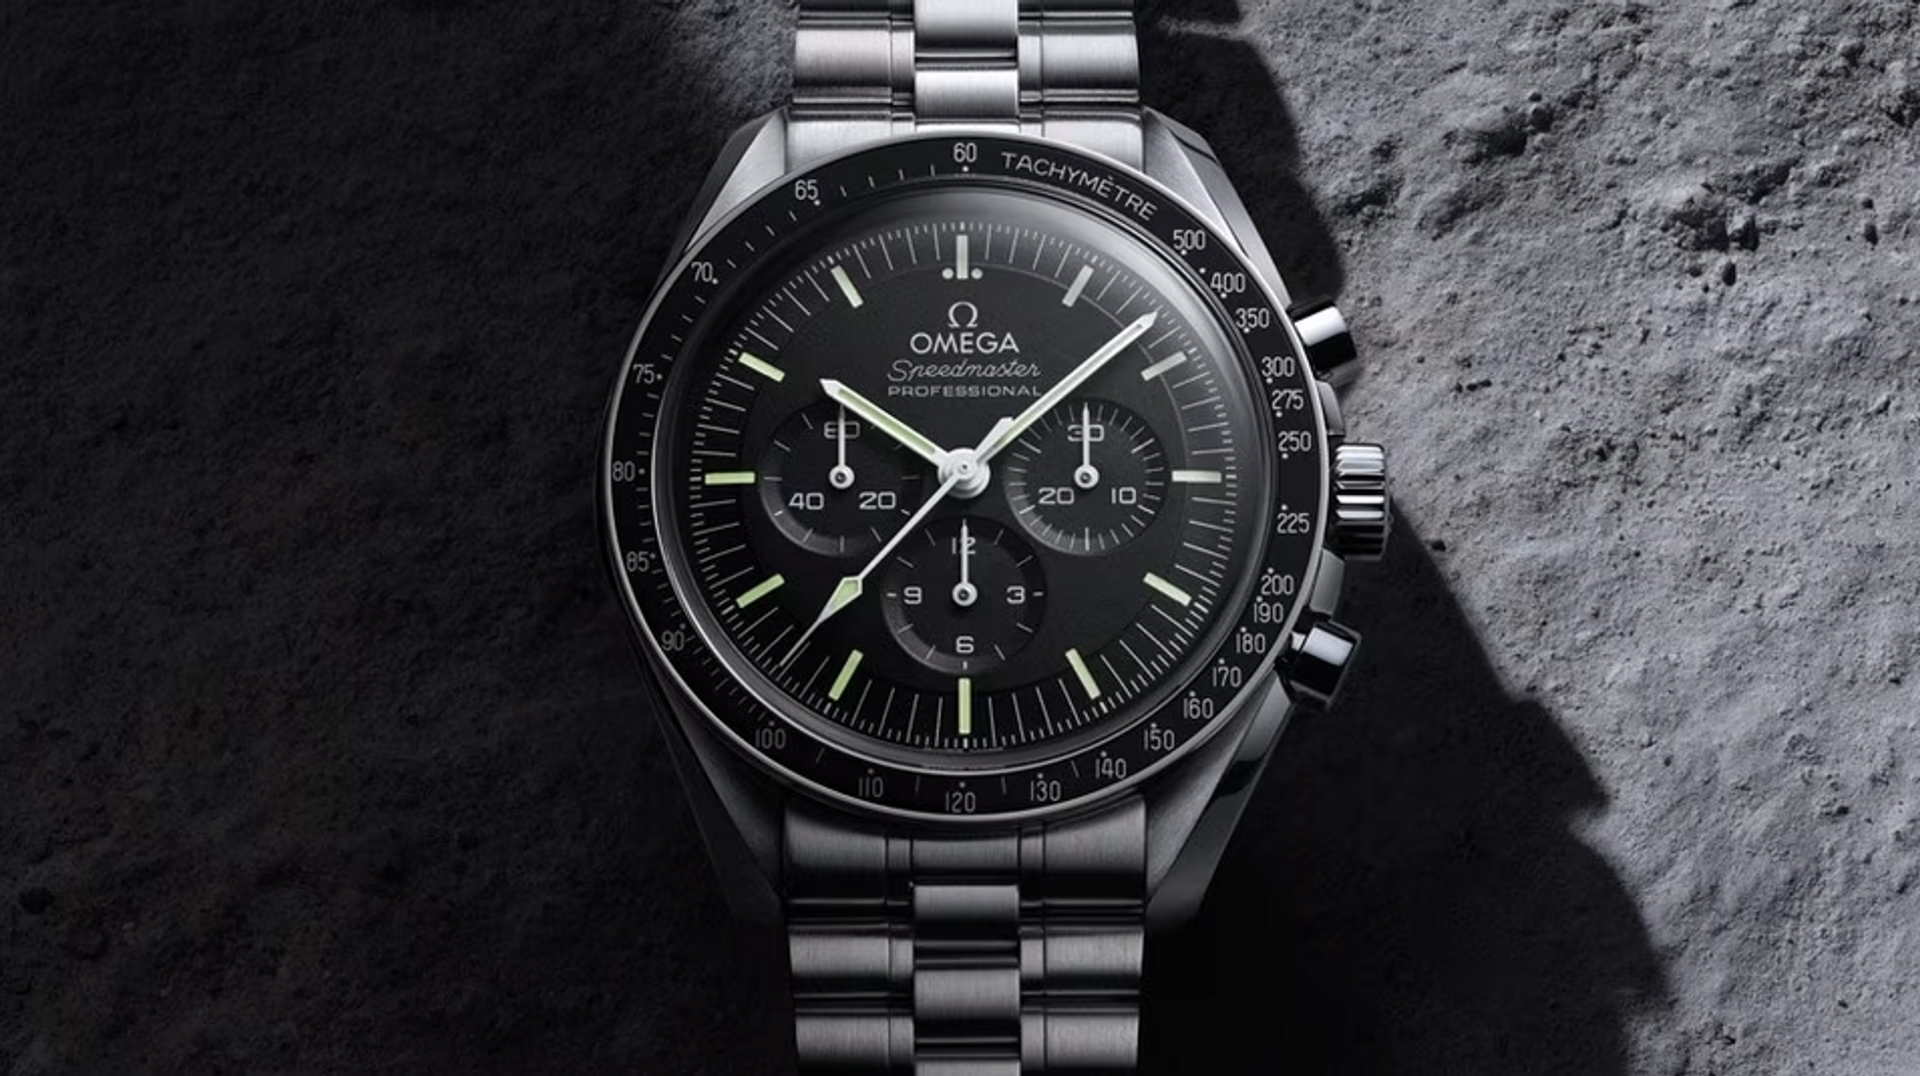 A black Omega Speedmaster, 1957. Set against a rocky background, the watch strap and setting is silver metal with a black face and three subdials.